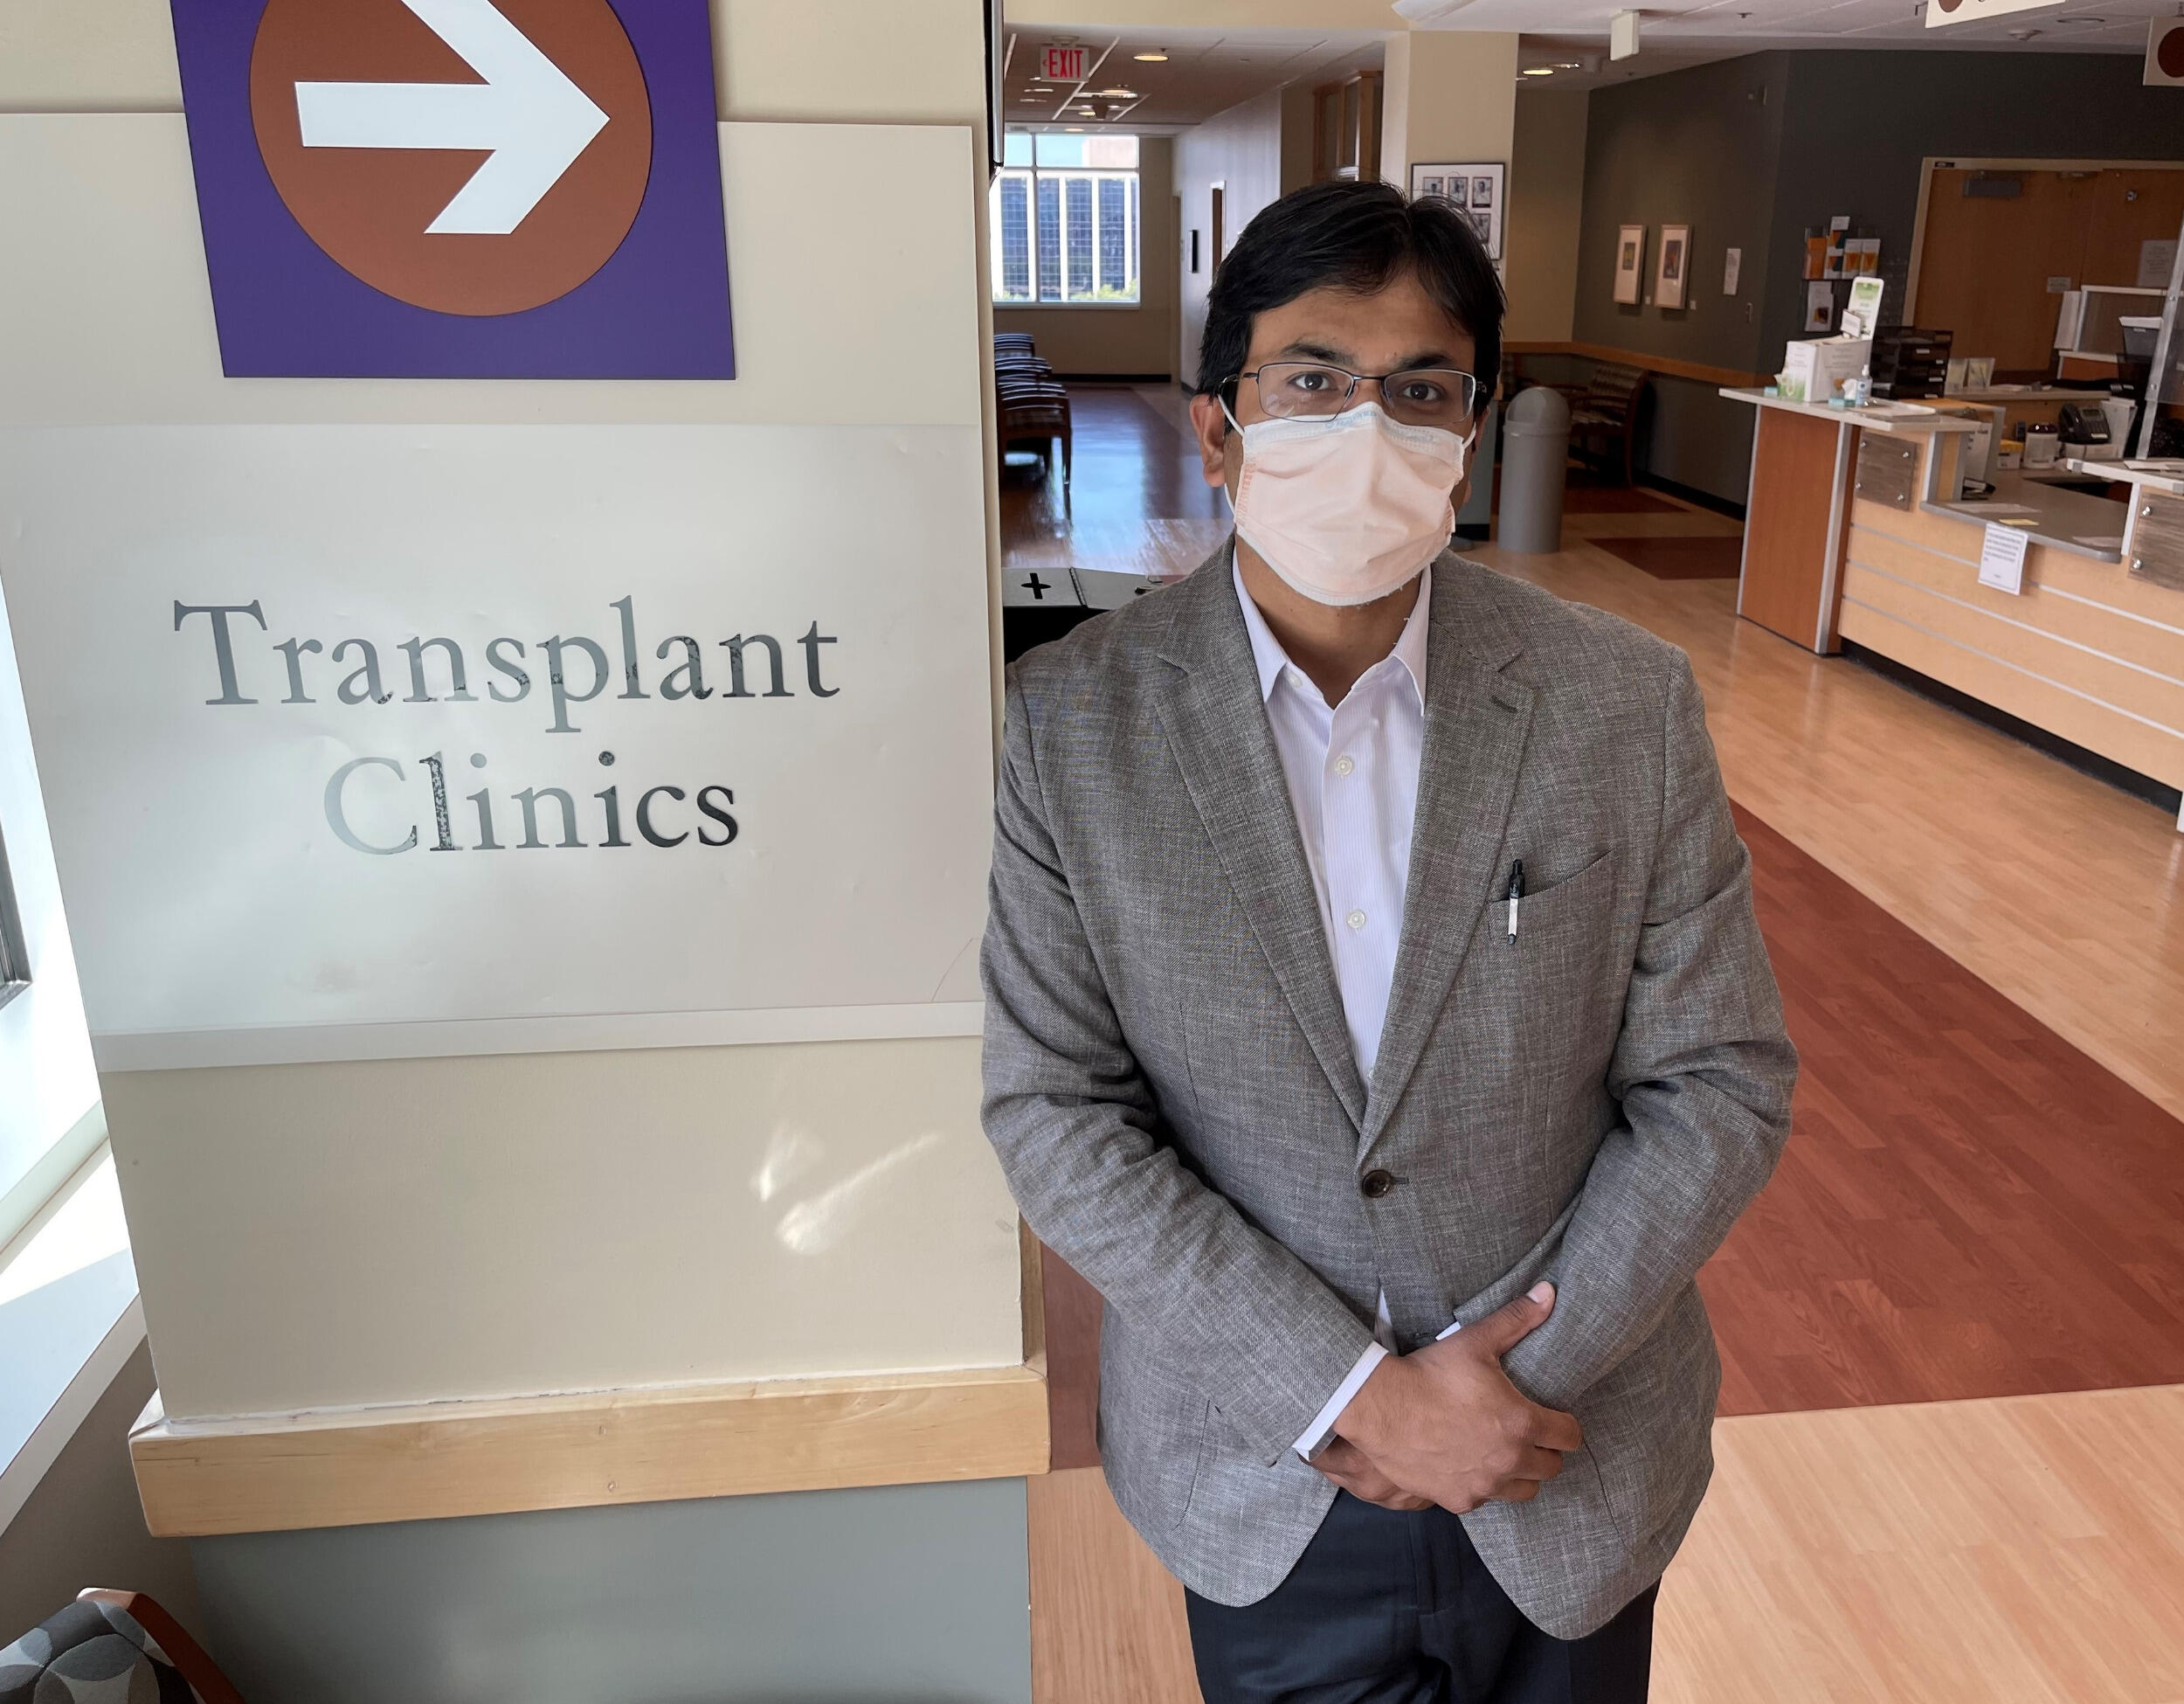 Portrait of man in mask and jacket next to Transplant Clinics sign.